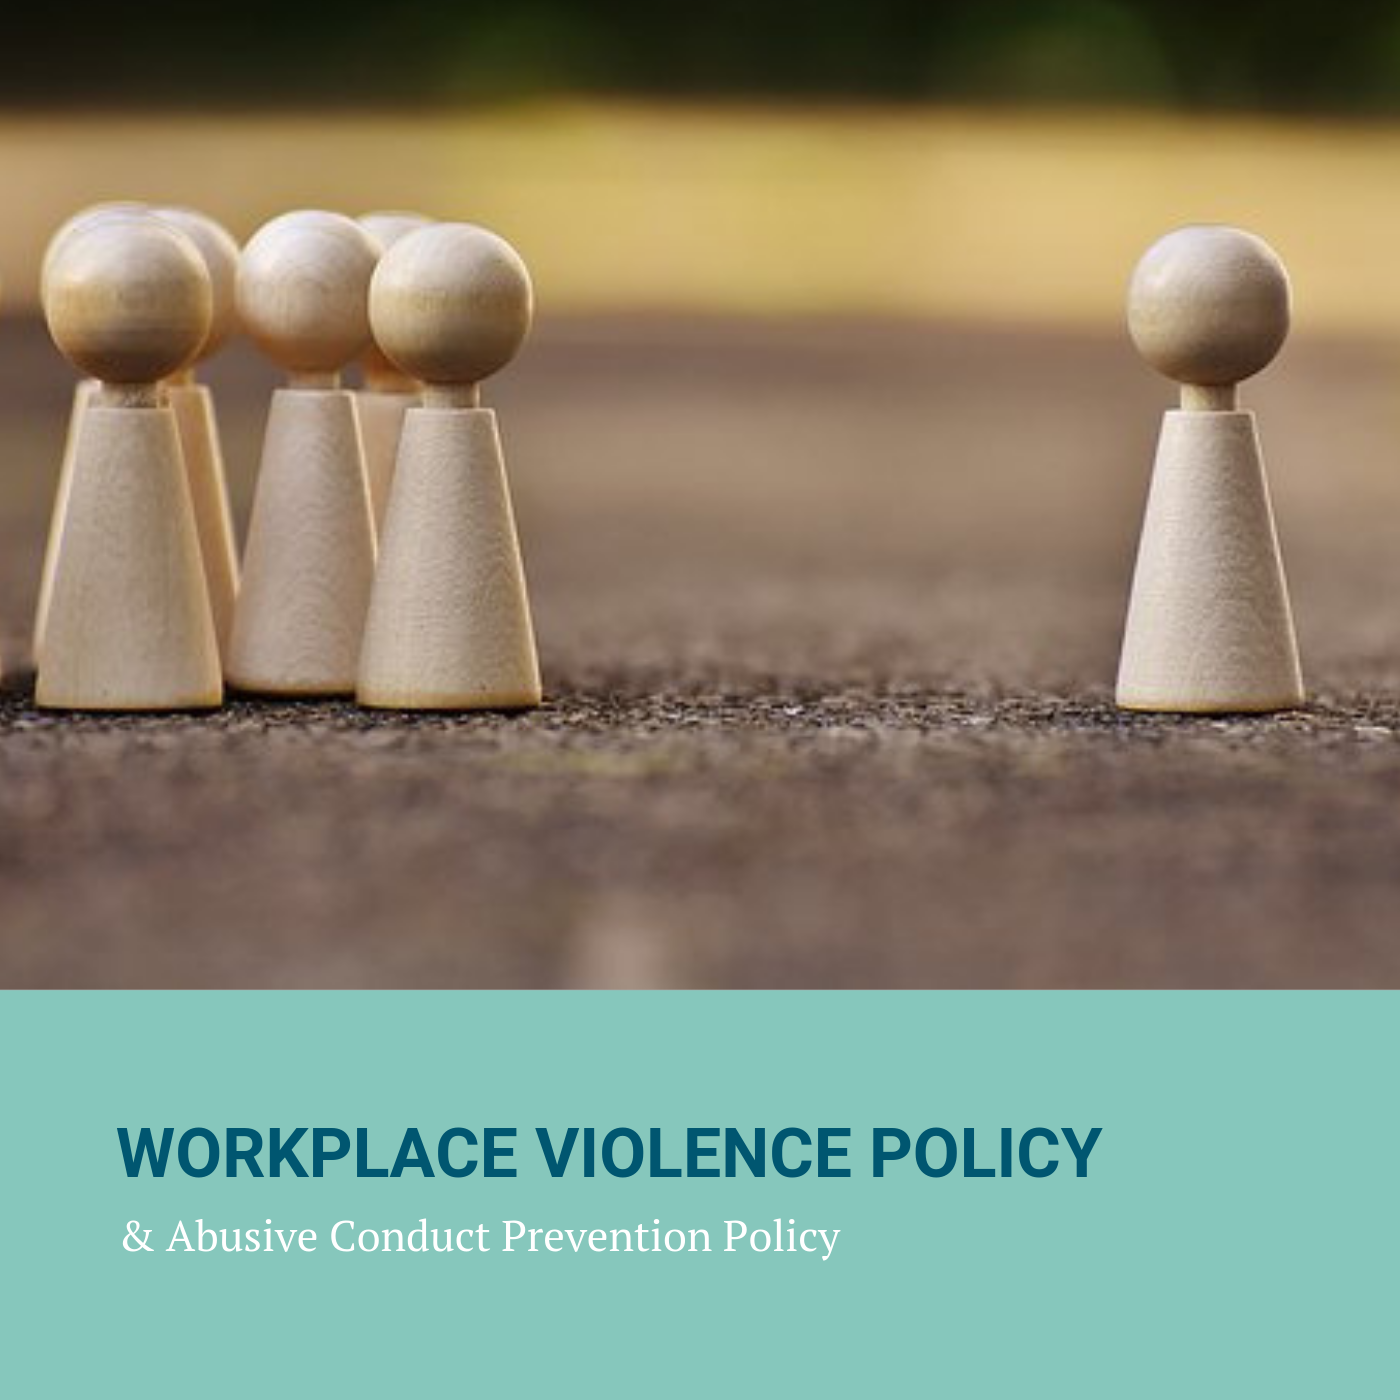 Workplace Violence Policy & Abusive Conduct Prevention Policy Image